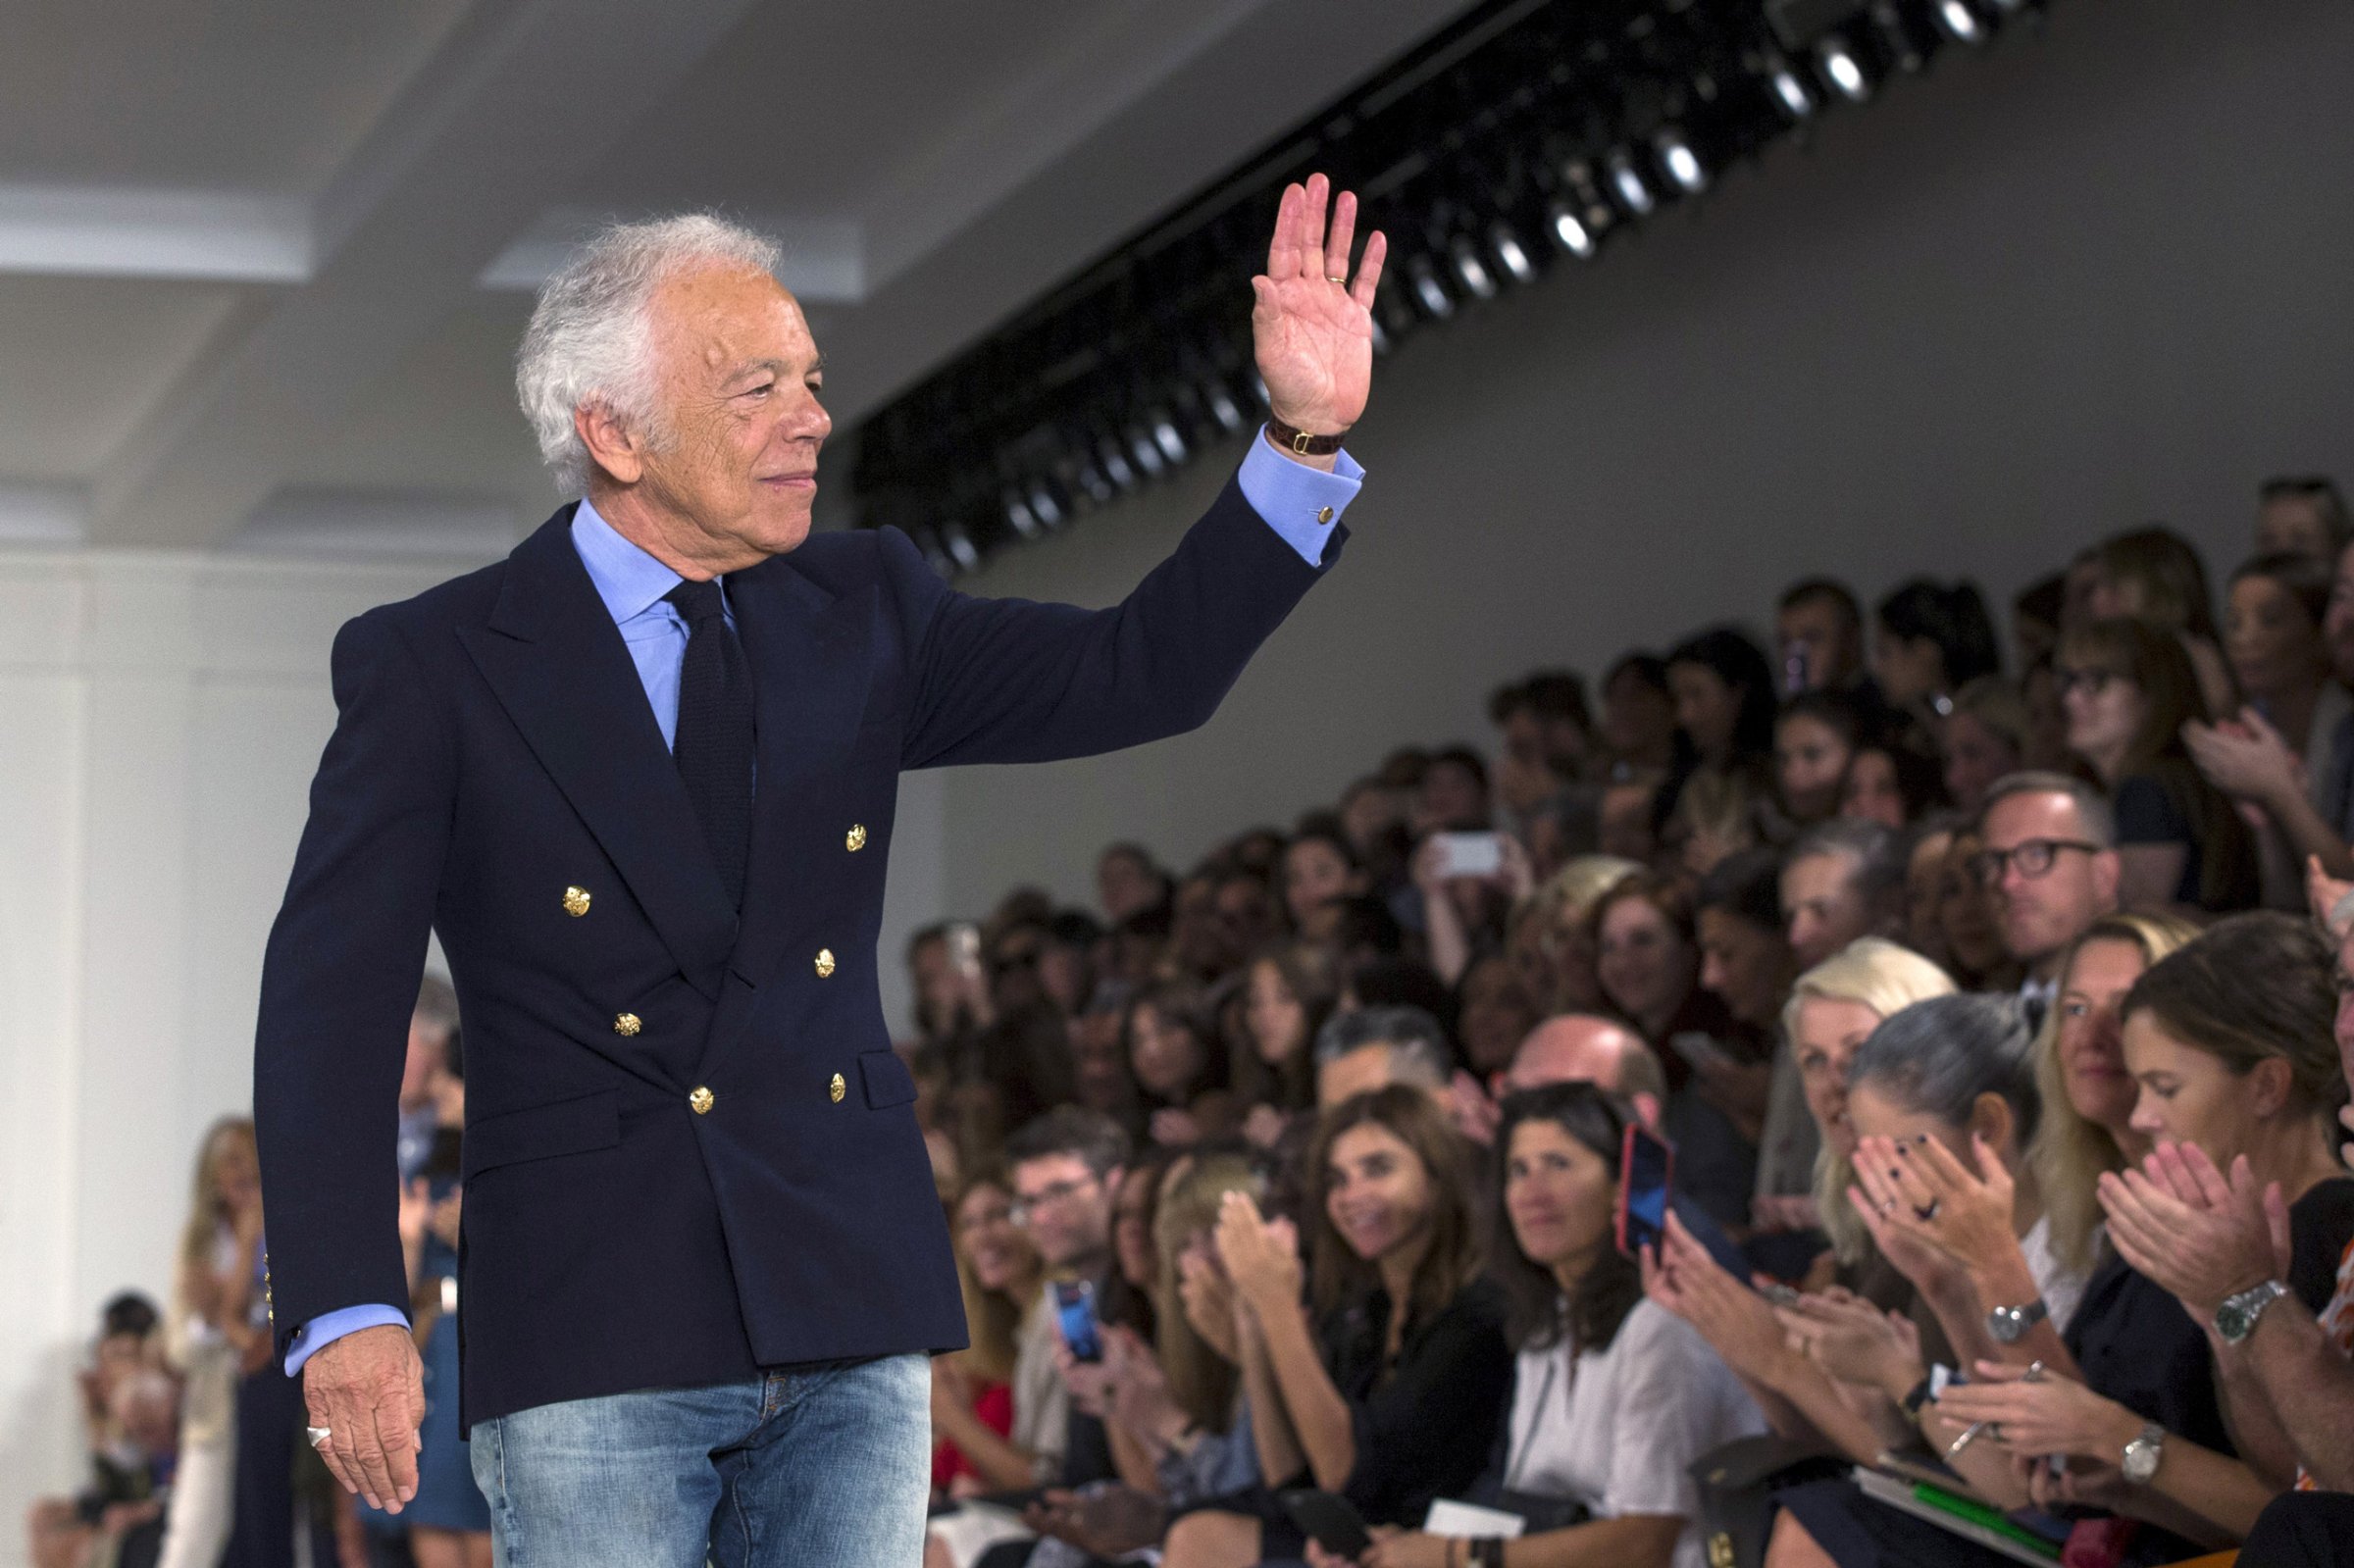 Designer Ralph Lauren greets the crowd after presenting his Spring/Summer 2016 collection during New York Fashion Week in New York